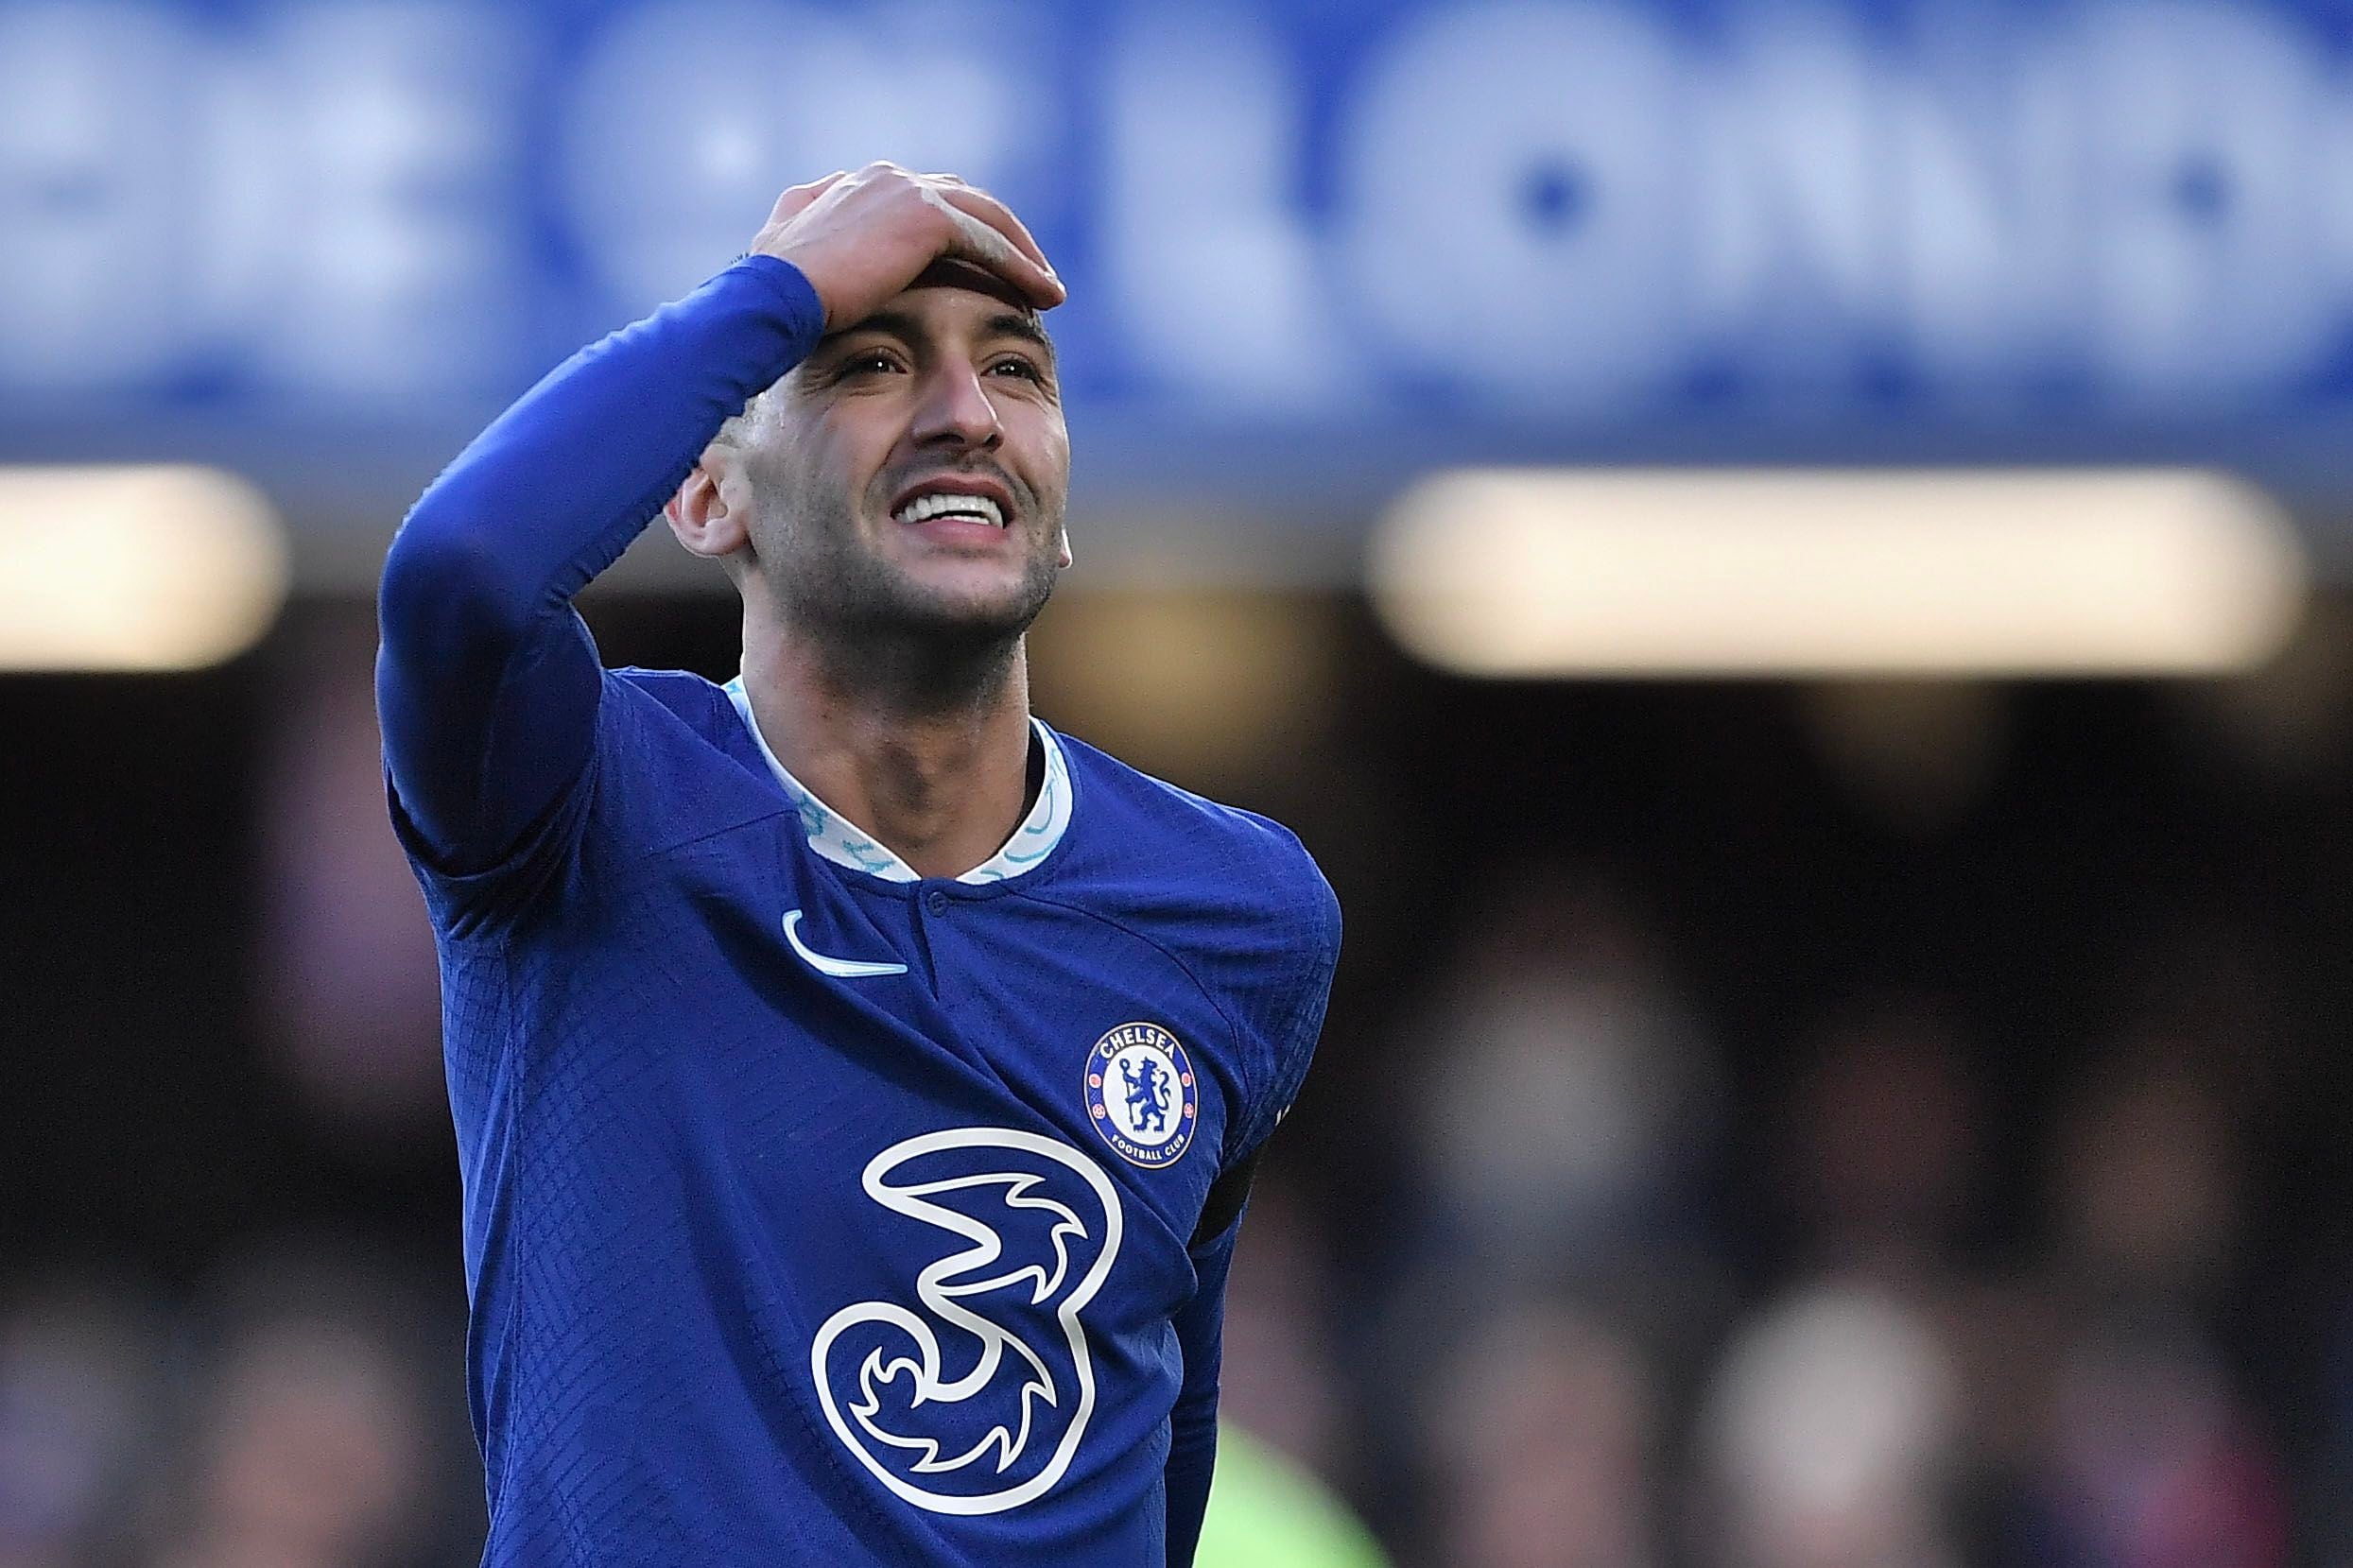 London (United Kingdom), 15/01/2023.- Hakim Ziyech of Chelsea looks dejected during the English Premier League soccer match between Chelsea FC and Crystal Palace in London, Britain, 15 January 2023. (Reino Unido, Londres) EFE/EPA/Vince Mignott EDITORIAL USE ONLY. No use with unauthorized audio, video, data, fixture lists, club/league logos or 'live' services. Online in-match use limited to 120 images, no video emulation. No use in betting, games or single club/league/player publications
